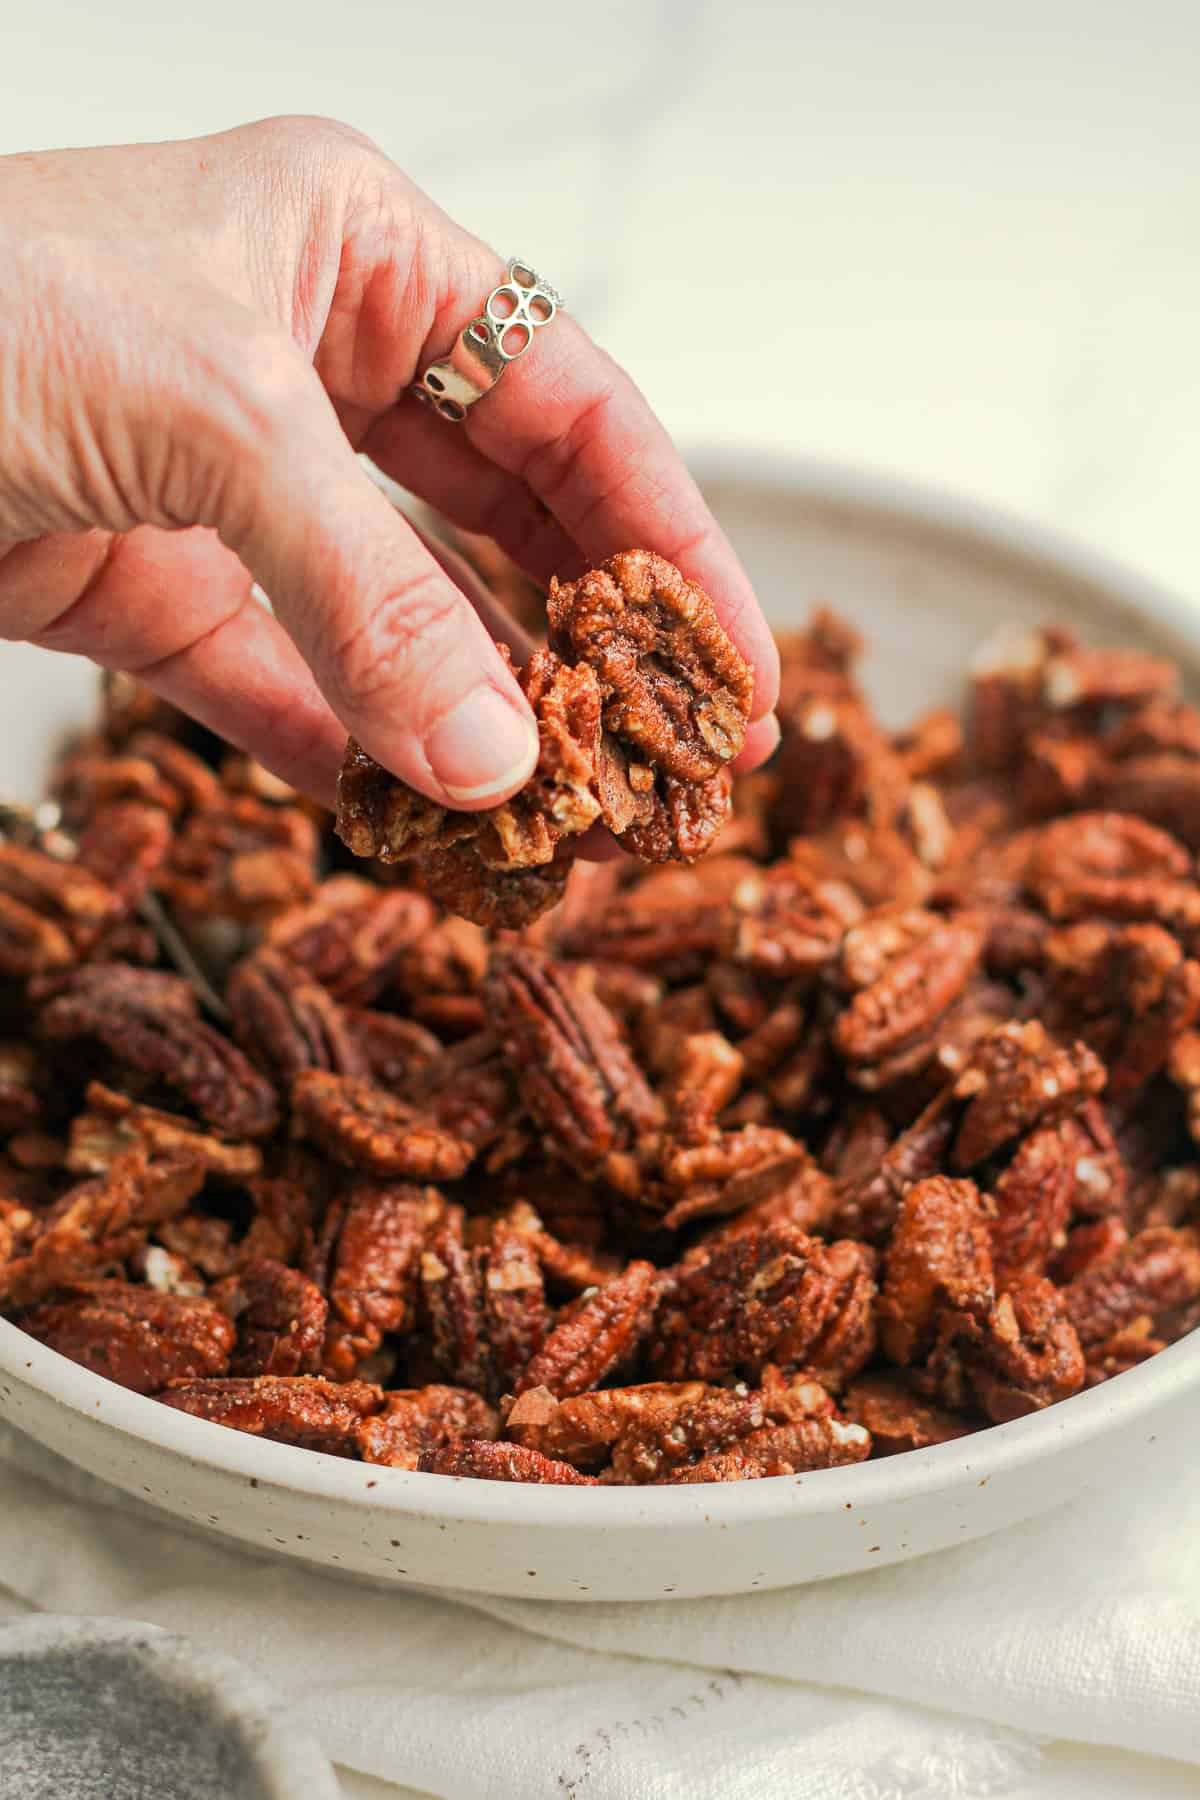 My hand holding some candied pecans over the bowl.